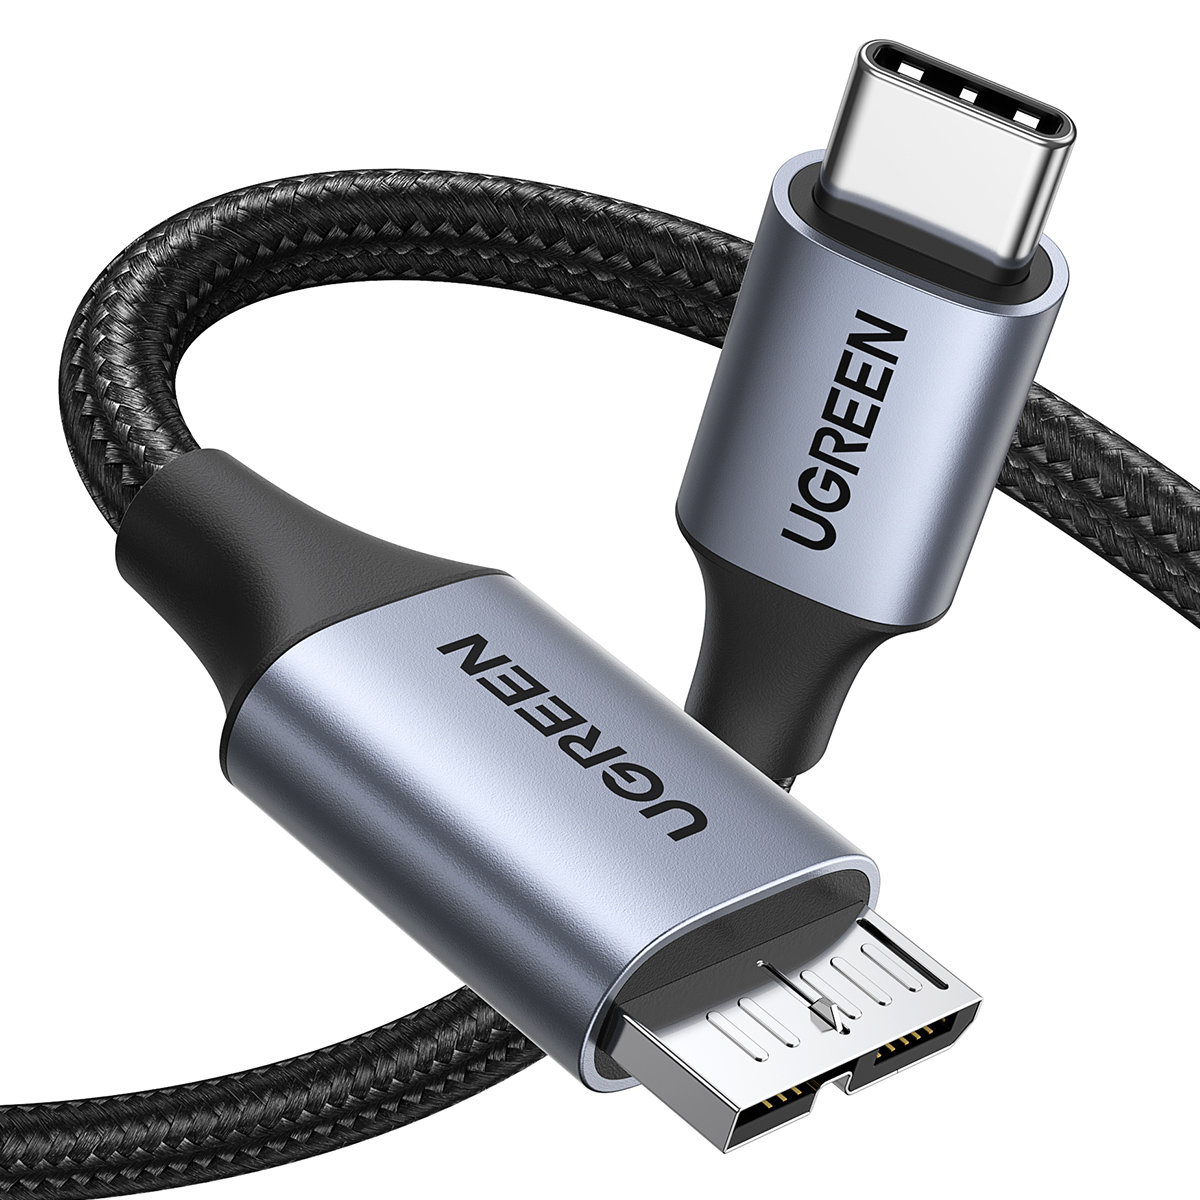 Cable USB-C to Micro USB UGREEN 15232, 1m (space gray) adapteris